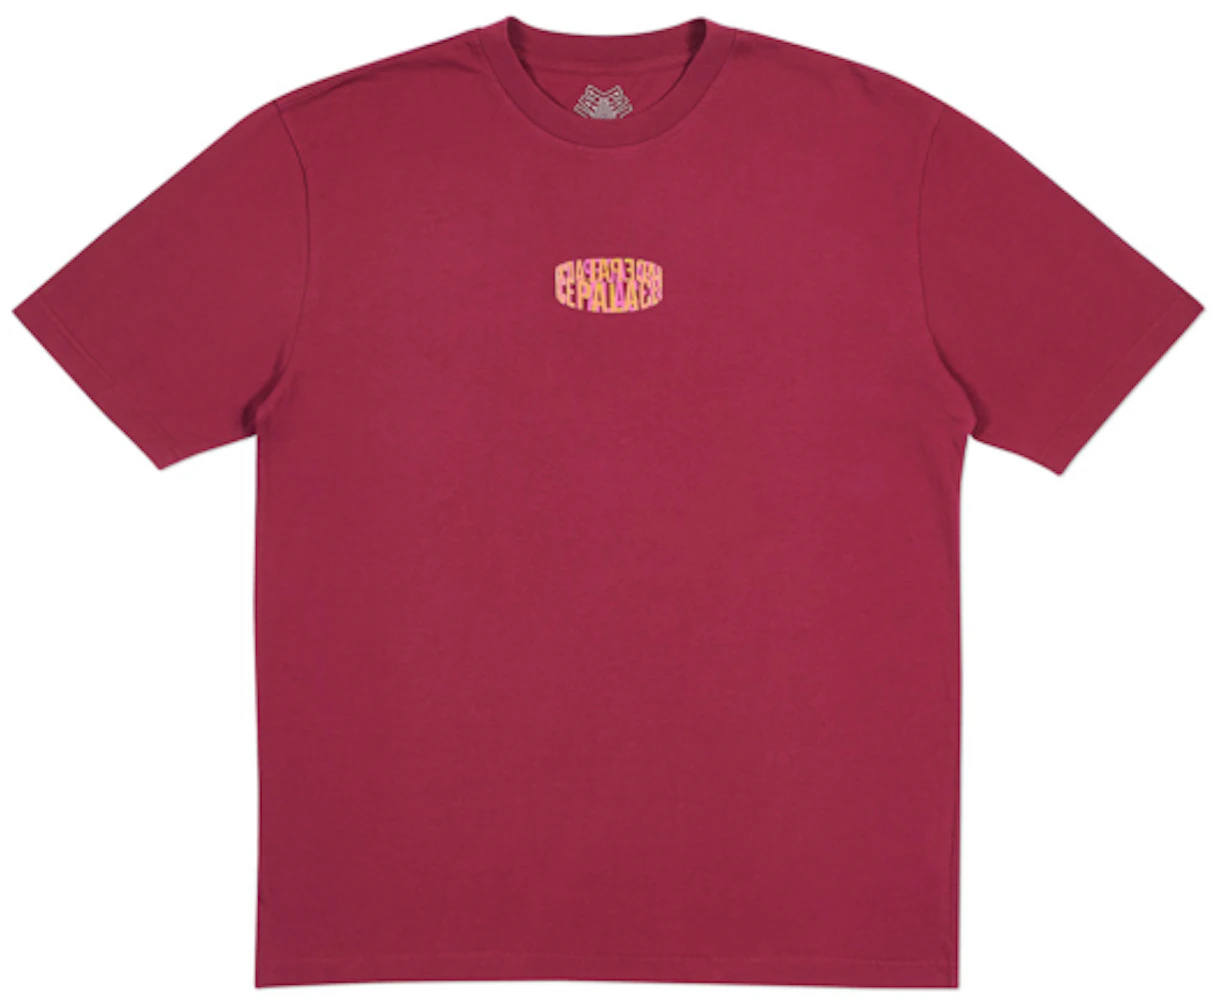 Palace Metal Heads T-Shirt Cherry Red Men's - FW18 - US